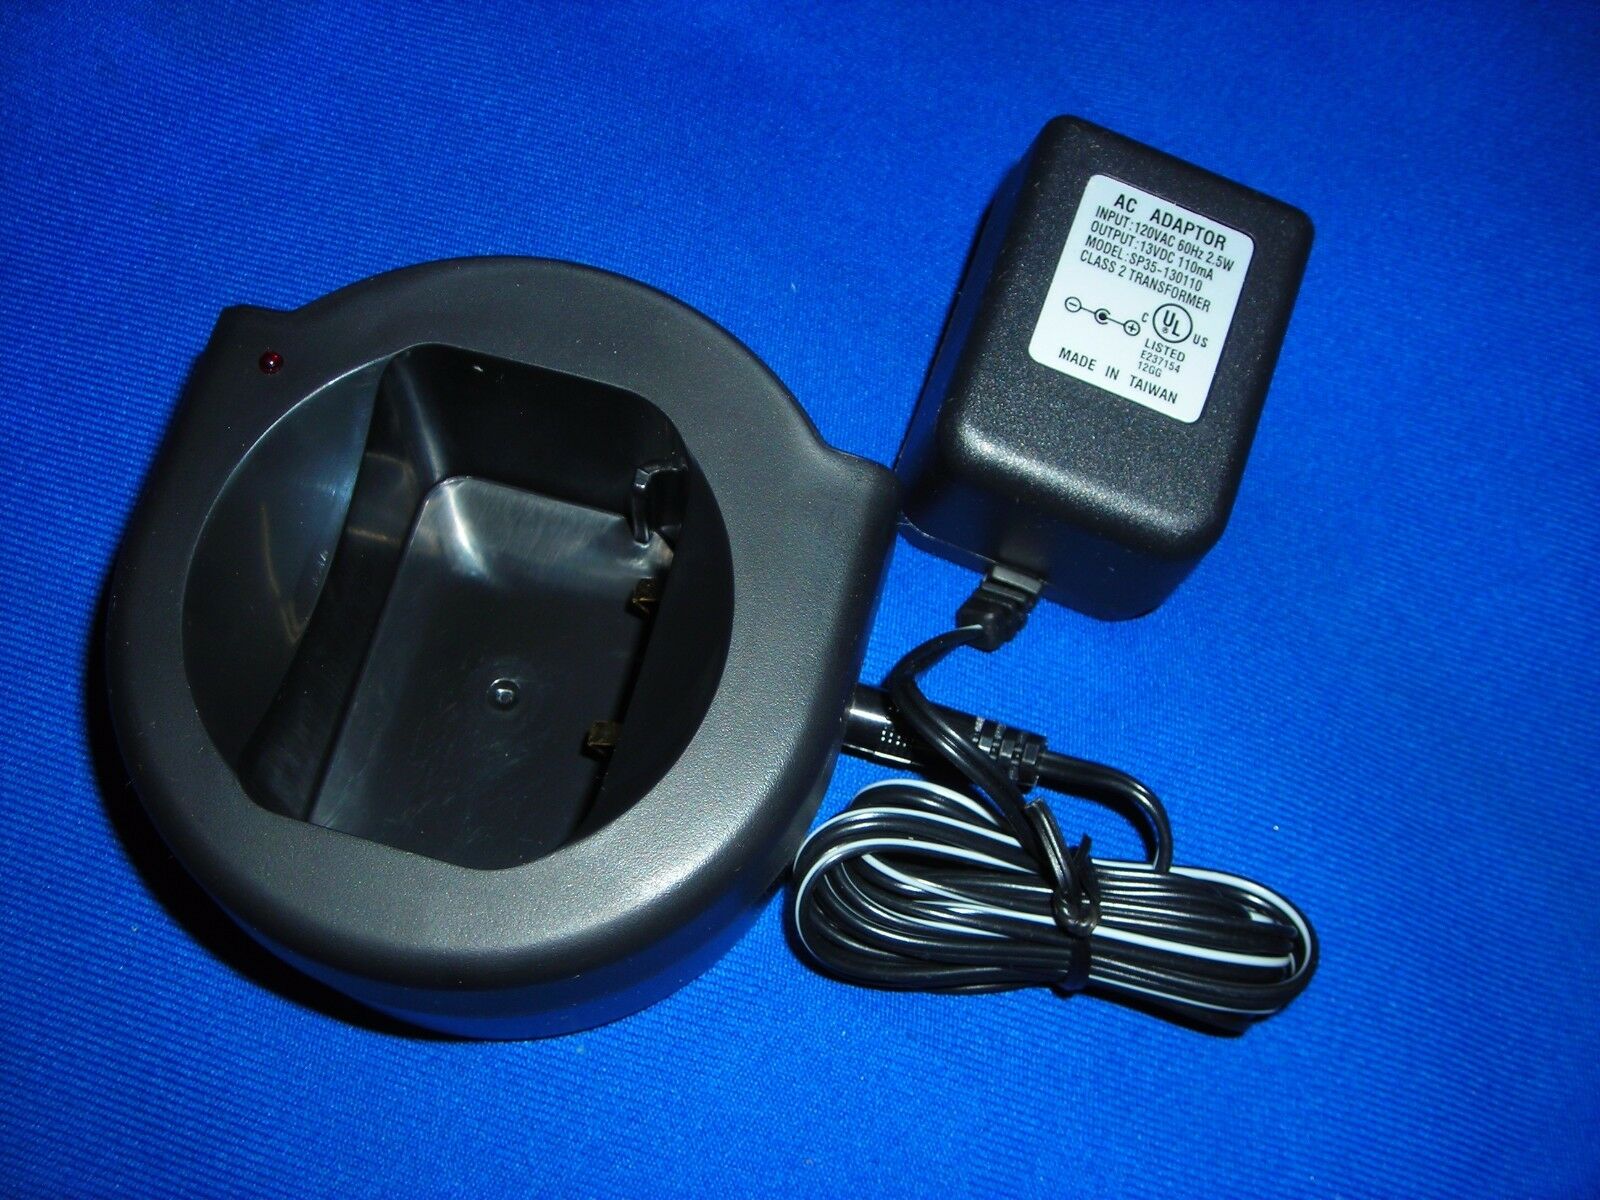 Trickle Battery Charger For Motorola#hnn9008/9012/pmnn4008...gp320/340/680/1280